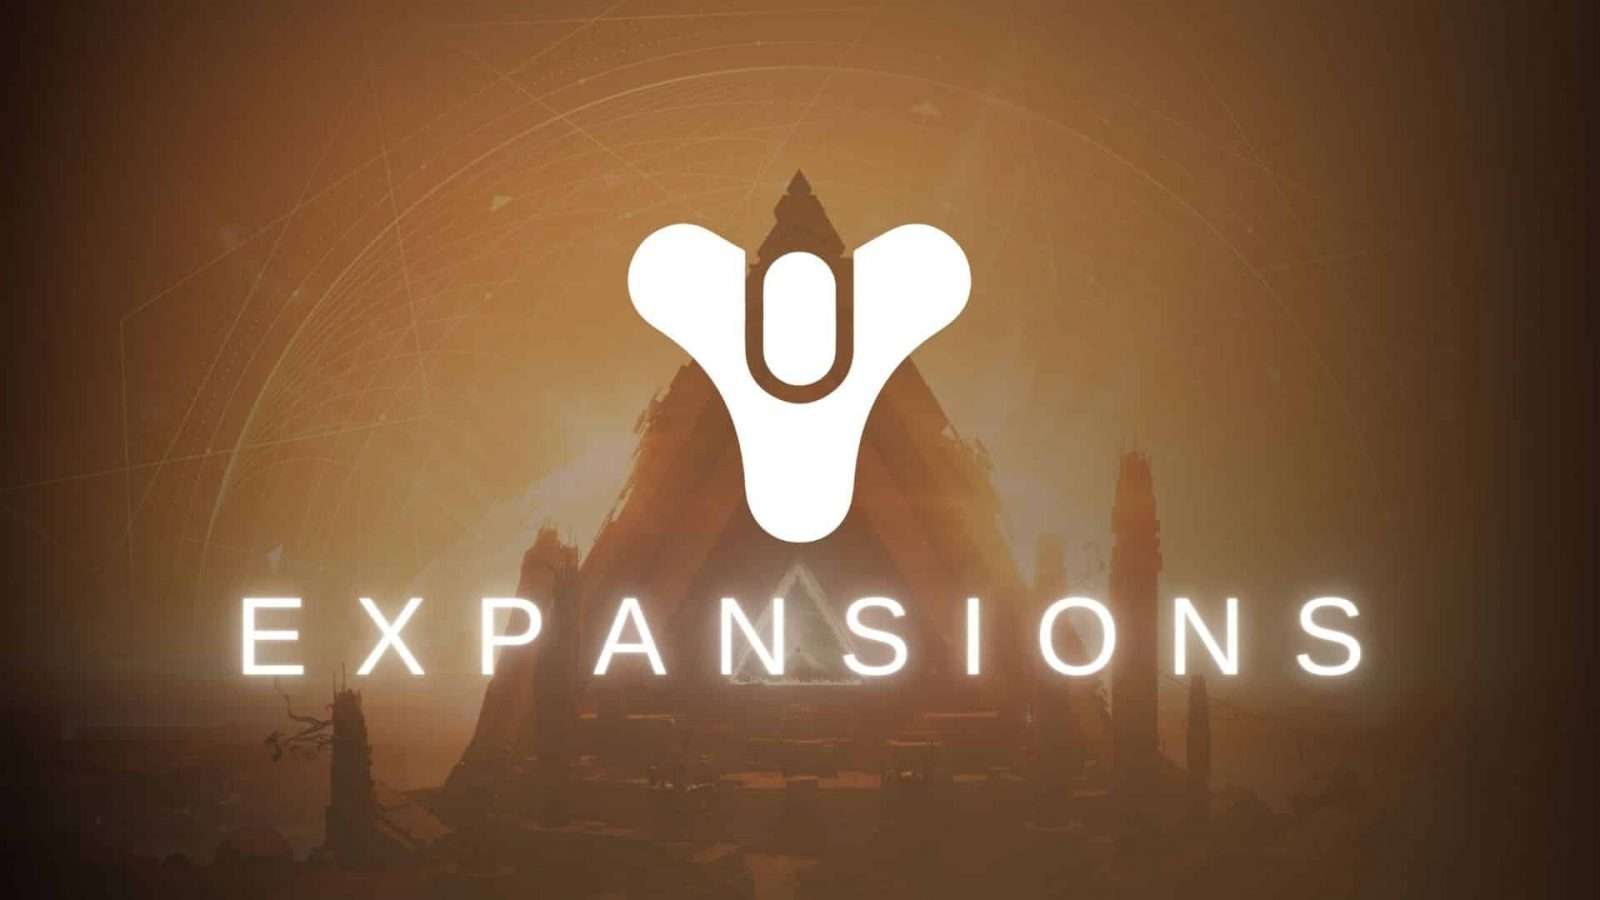 An image of the Destiny logo with expansions